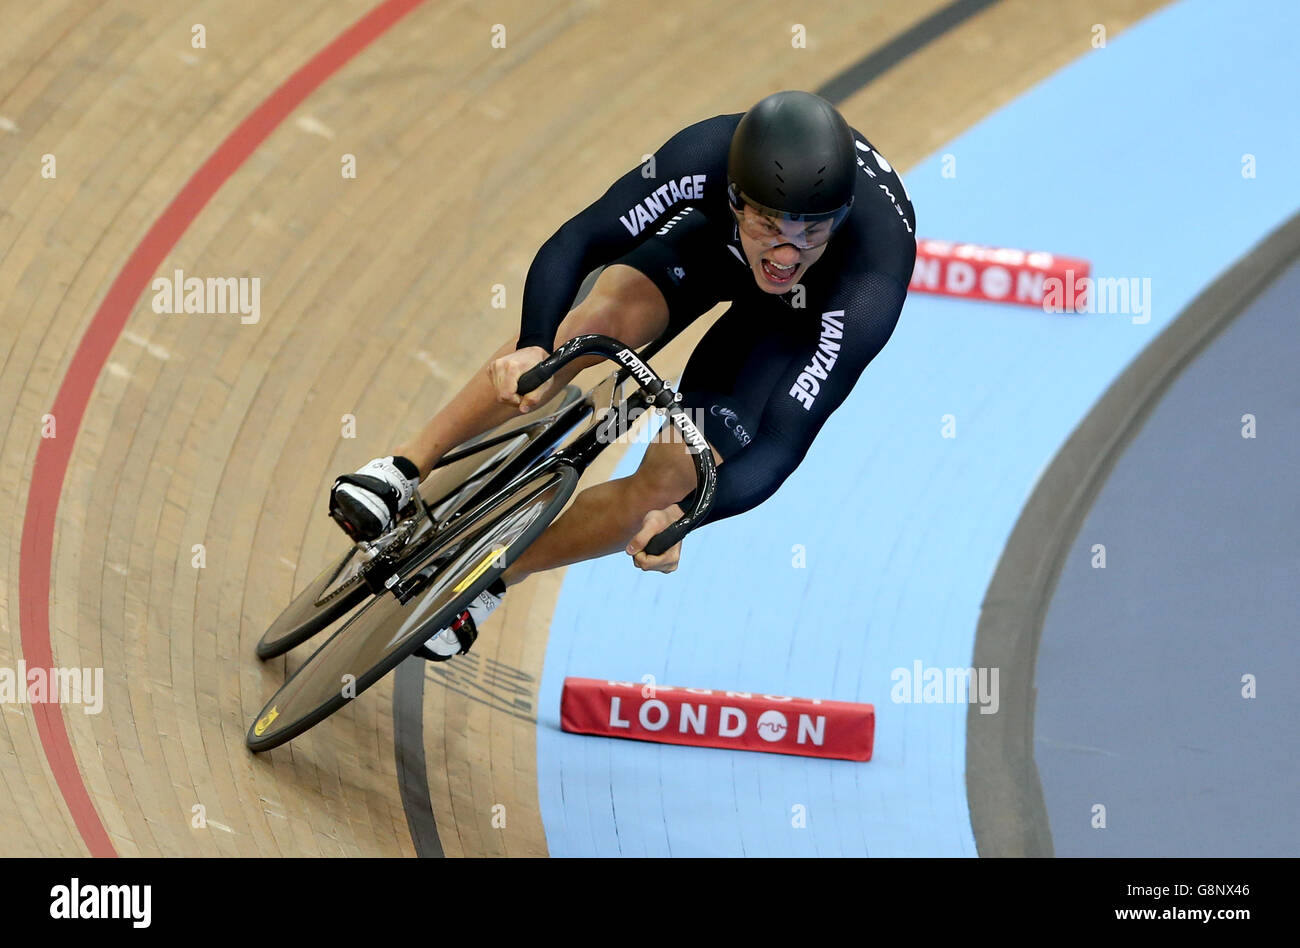 New Zealand's Sam Webster during day three of the UCI Track Cycling World Championships at Lee Valley VeloPark, London. PRESS ASSOCIATION Photo. Picture date: Friday March 4, 2016. See PA story CYCLING World. Photo credit should read: Tim Goode/PA Wire. Stock Photo